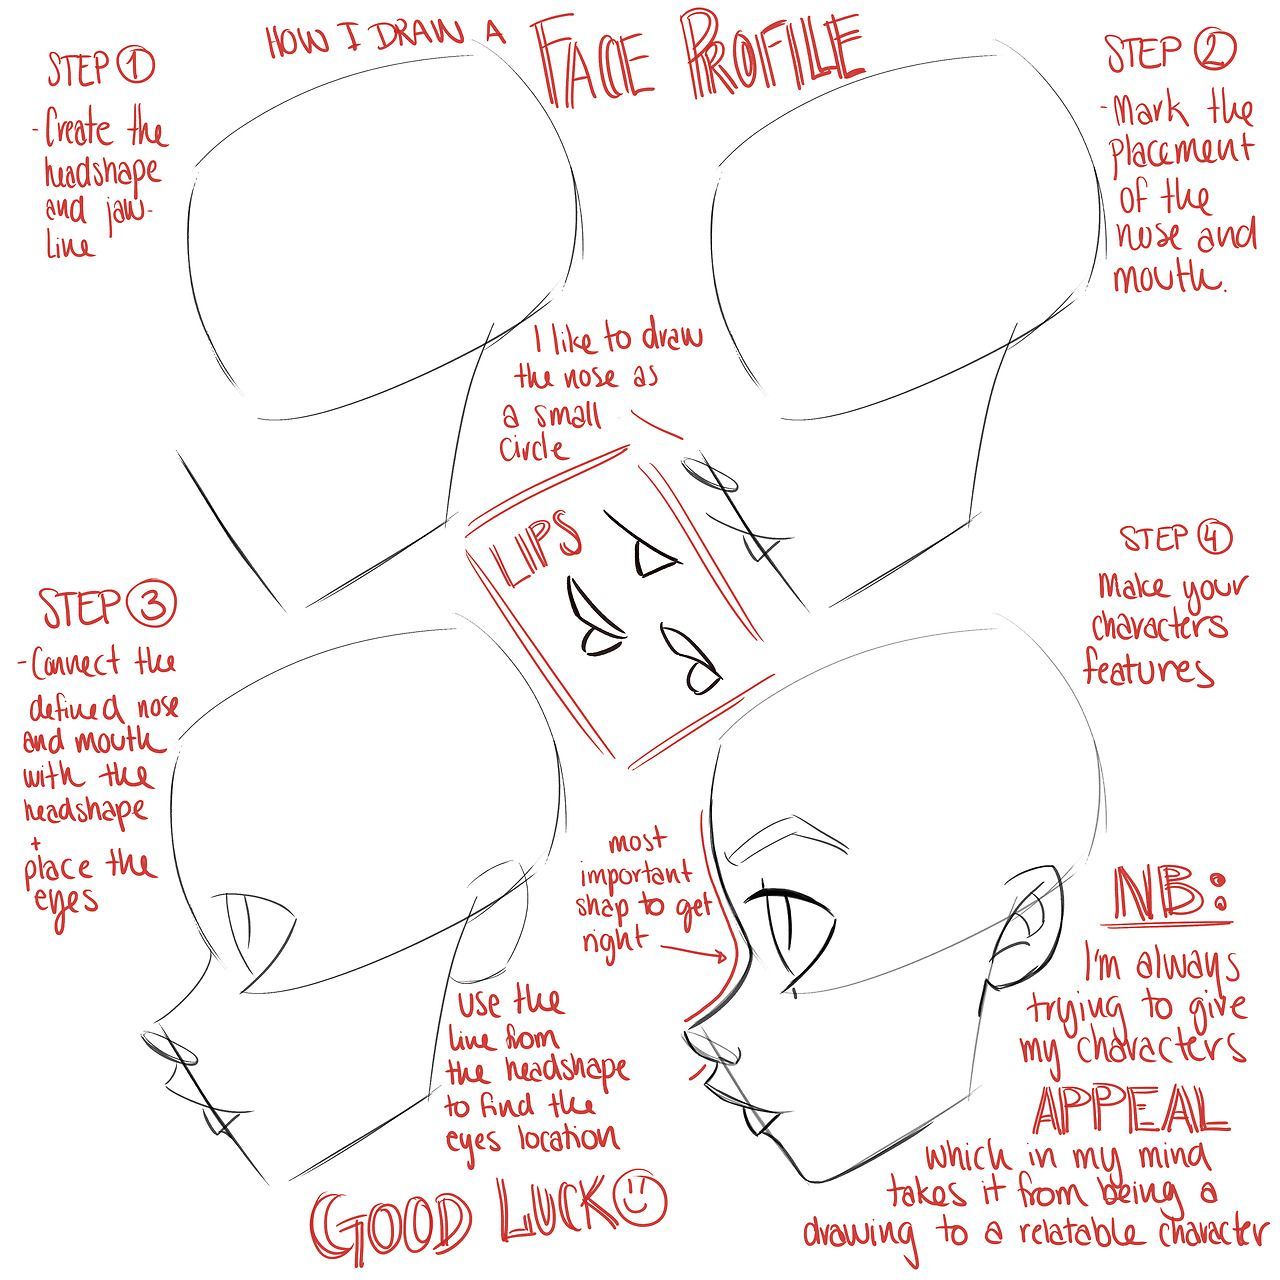 @elizabeth_b_13 on Instagram asked me how I draw the profile of the head and asked for a tutorial. Which